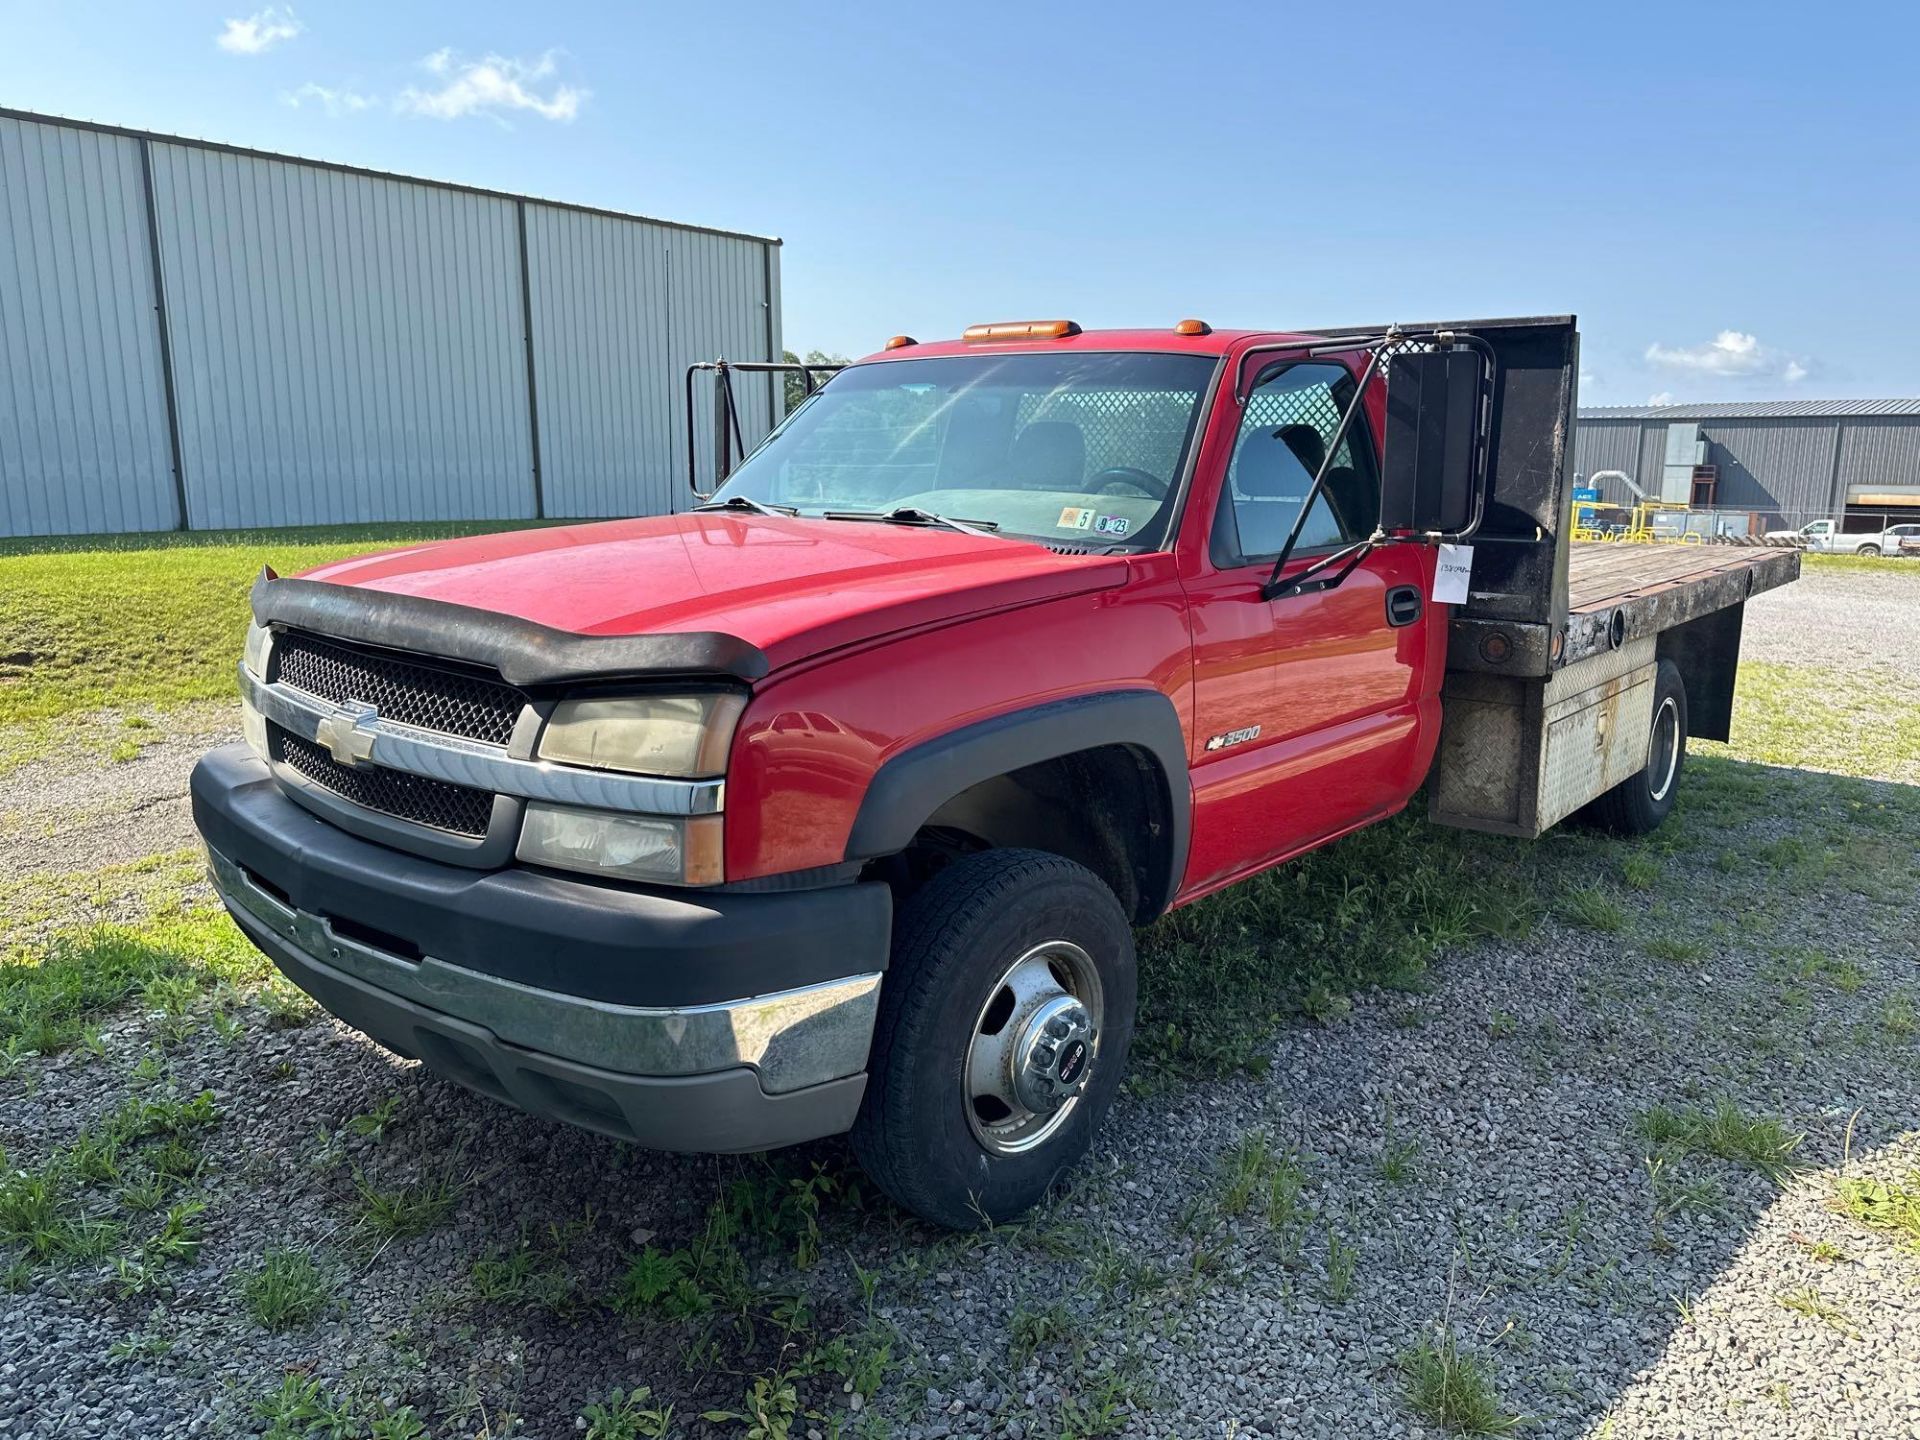 2003 Chevy Silverado 3500 12” Flatbed Truck, 138098mi w/ Toolbox and Flatbed Sides